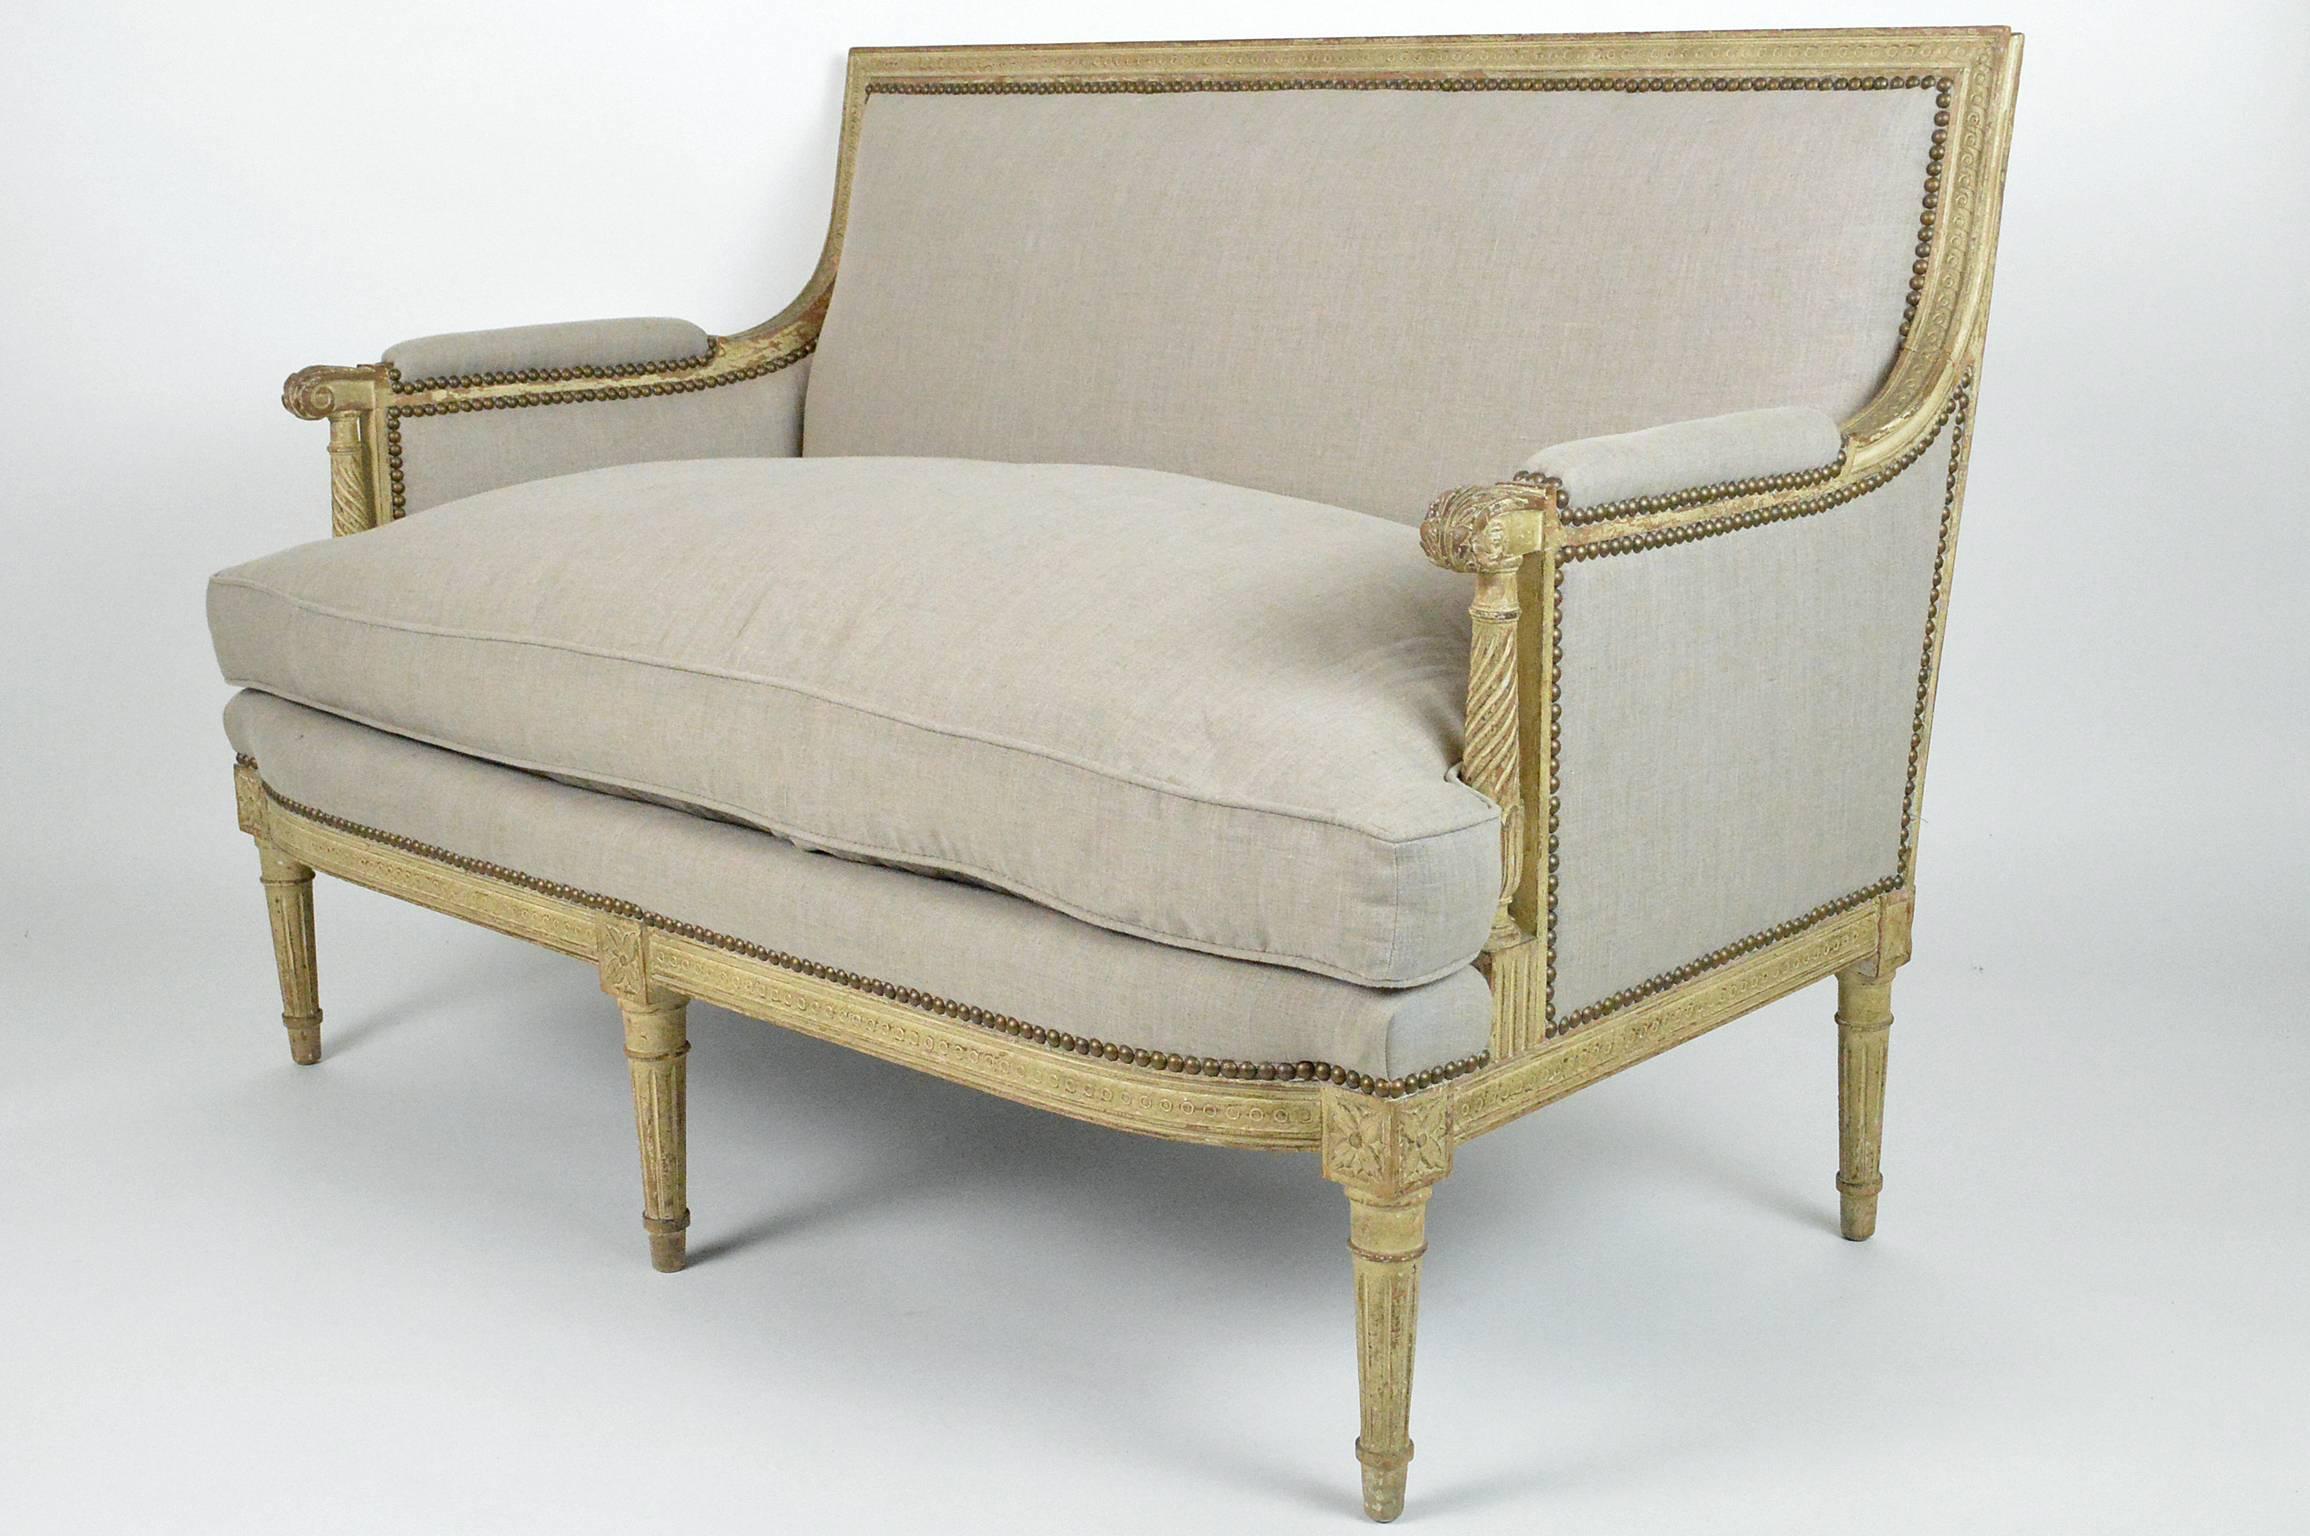 Louis XVI style French settee with original painted finish
Provenance: Foyer of Joan Rivers NYC Apartment.